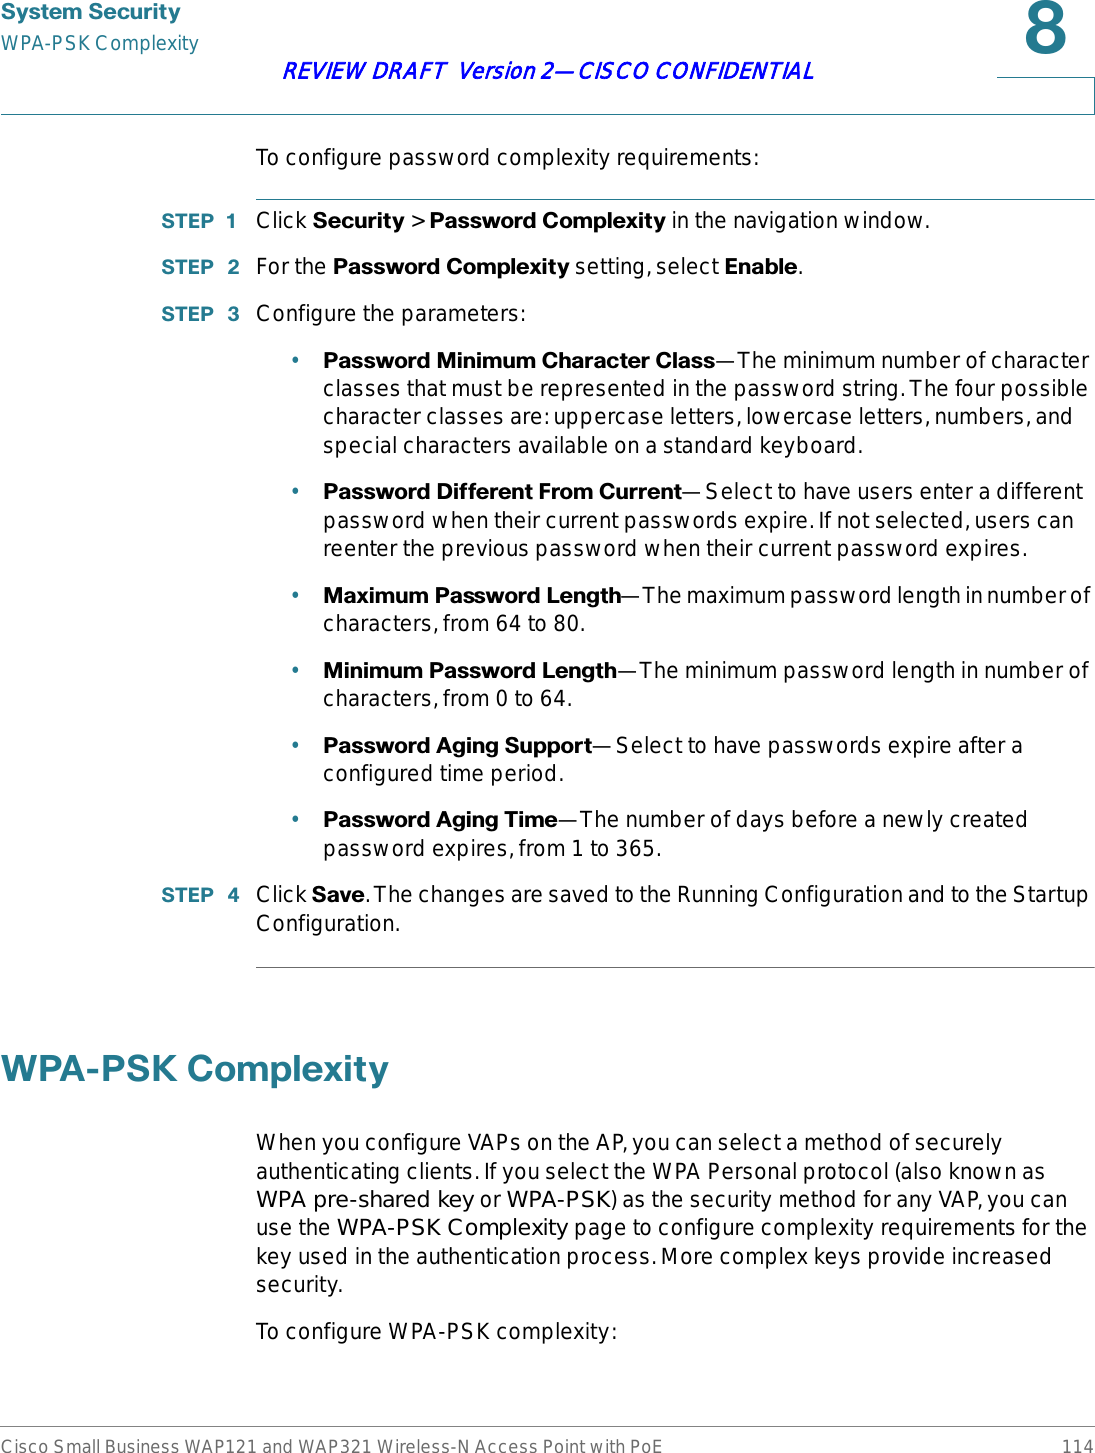 6\VWHP6HFXULW\WPA-PSK ComplexityCisco Small Business WAP121 and WAP321 Wireless-N Access Point with PoE 114REVIEW DRAFT  Version 2—CISCO CONFIDENTIALTo configure password complexity requirements:67(3  Click 6HFXULW\&gt;3DVVZRUG&amp;RPSOH[LW\ in the navigation window.67(3  For the 3DVVZRUG&amp;RPSOH[LW\ setting, select (QDEOH.67(3  Configure the parameters:•3DVVZRUG0LQLPXP&amp;KDUDFWHU&amp;ODVV—The minimum number of character classes that must be represented in the password string. The four possible character classes are: uppercase letters, lowercase letters, numbers, and special characters available on a standard keyboard.•3DVVZRUG&apos;LIIHUHQW)URP&amp;XUUHQW—Select to have users enter a different password when their current passwords expire. If not selected, users can reenter the previous password when their current password expires.•0D[LPXP3DVVZRUG/HQJWK—The maximum password length in number of characters, from 64 to 80.•0LQLPXP3DVVZRUG/HQJWK—The minimum password length in number of characters, from 0 to 64.•3DVVZRUG$JLQJ6XSSRUW—Select to have passwords expire after a configured time period.•3DVVZRUG$JLQJ7LPH—The number of days before a newly created password expires, from 1 to 365.67(3  Click 6DYH. The changes are saved to the Running Configuration and to the Startup Configuration.:3$36.&amp;RPSOH[LW\When you configure VAPs on the AP, you can select a method of securely authenticating clients. If you select the WPA Personal protocol (also known as WPA pre-shared key or WPA-PSK) as the security method for any VAP, you can use the WPA-PSK Complexity page to configure complexity requirements for the key used in the authentication process. More complex keys provide increased security.To configure WPA-PSK complexity: